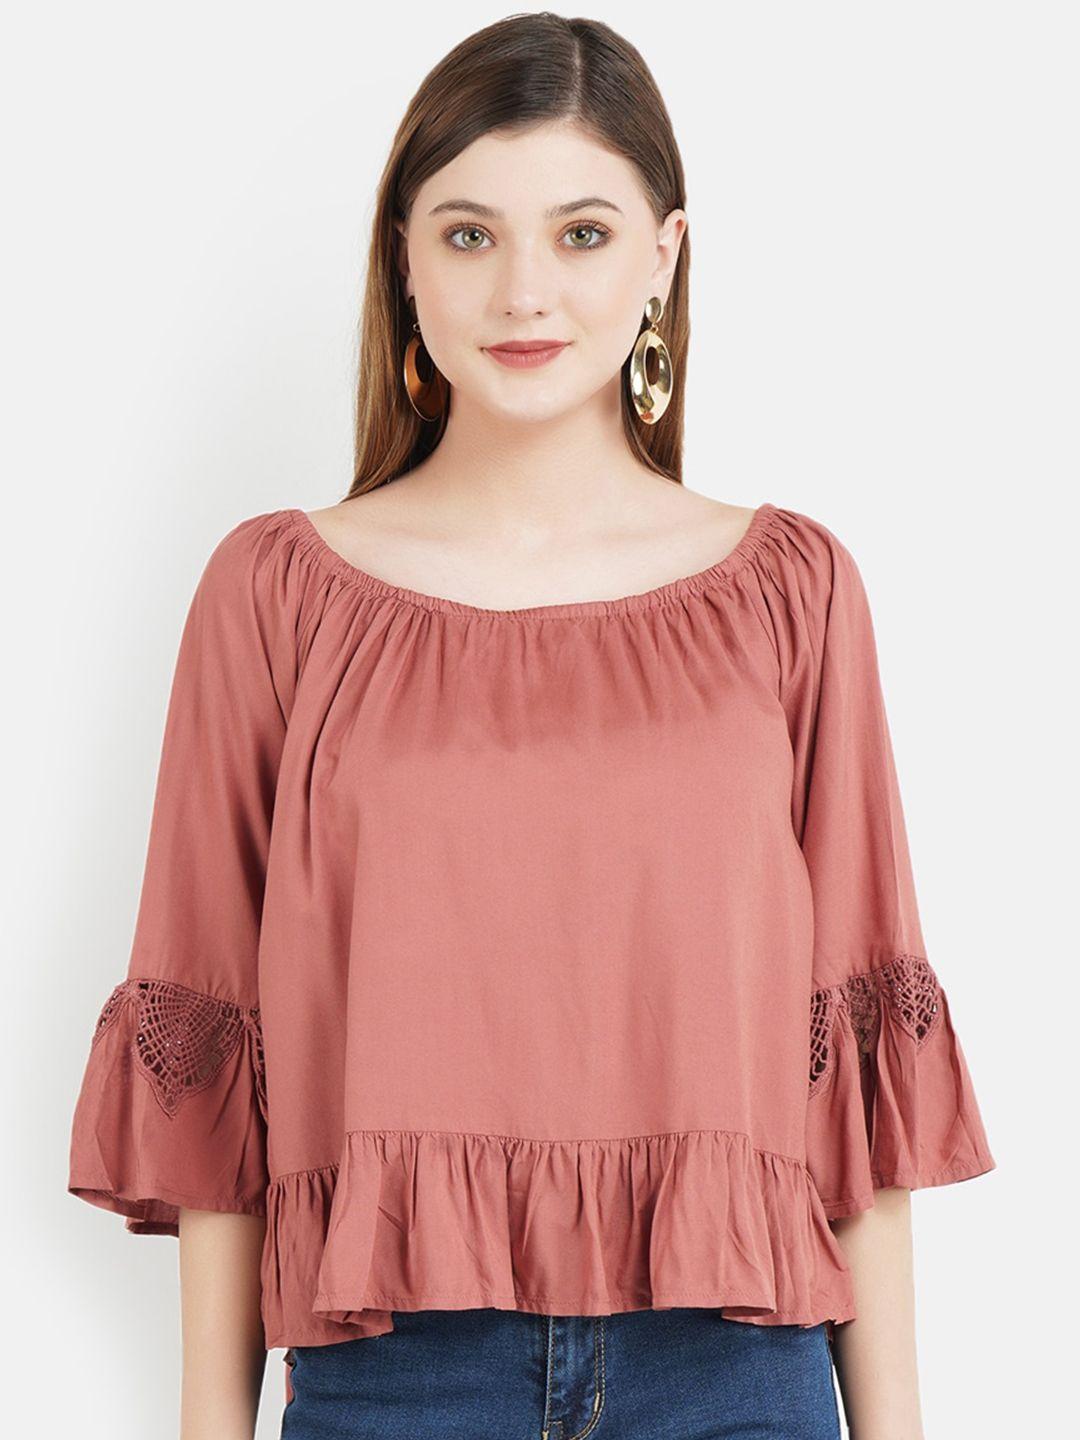 aditi-wasan-coral-pink-bell-sleeves-a-line-top